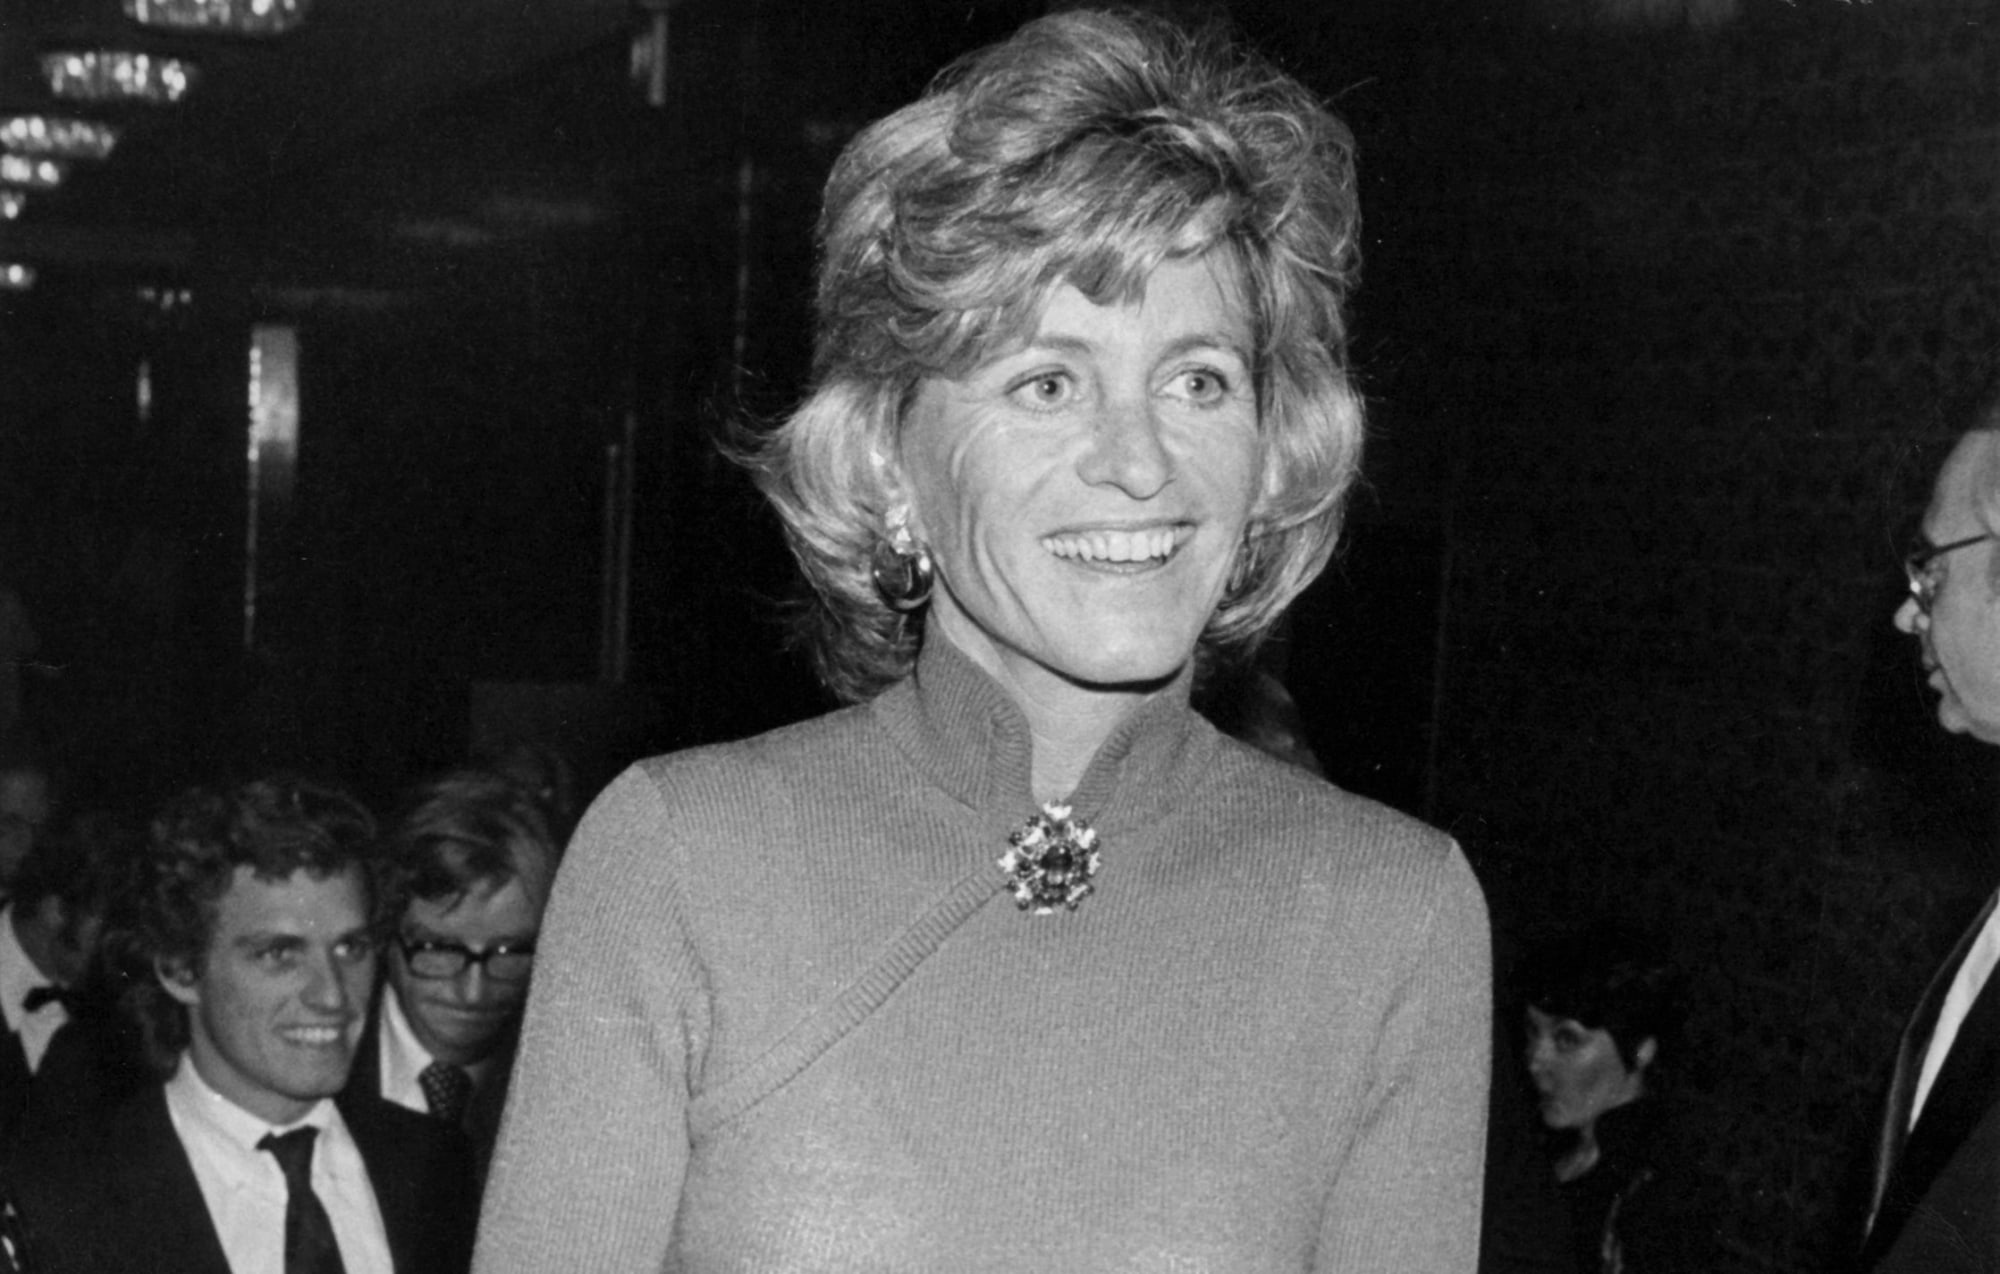 Jean Kennedy Smith, Former Ambassador to Ireland and Last Surviving Sibling of JFK, Dead at 92